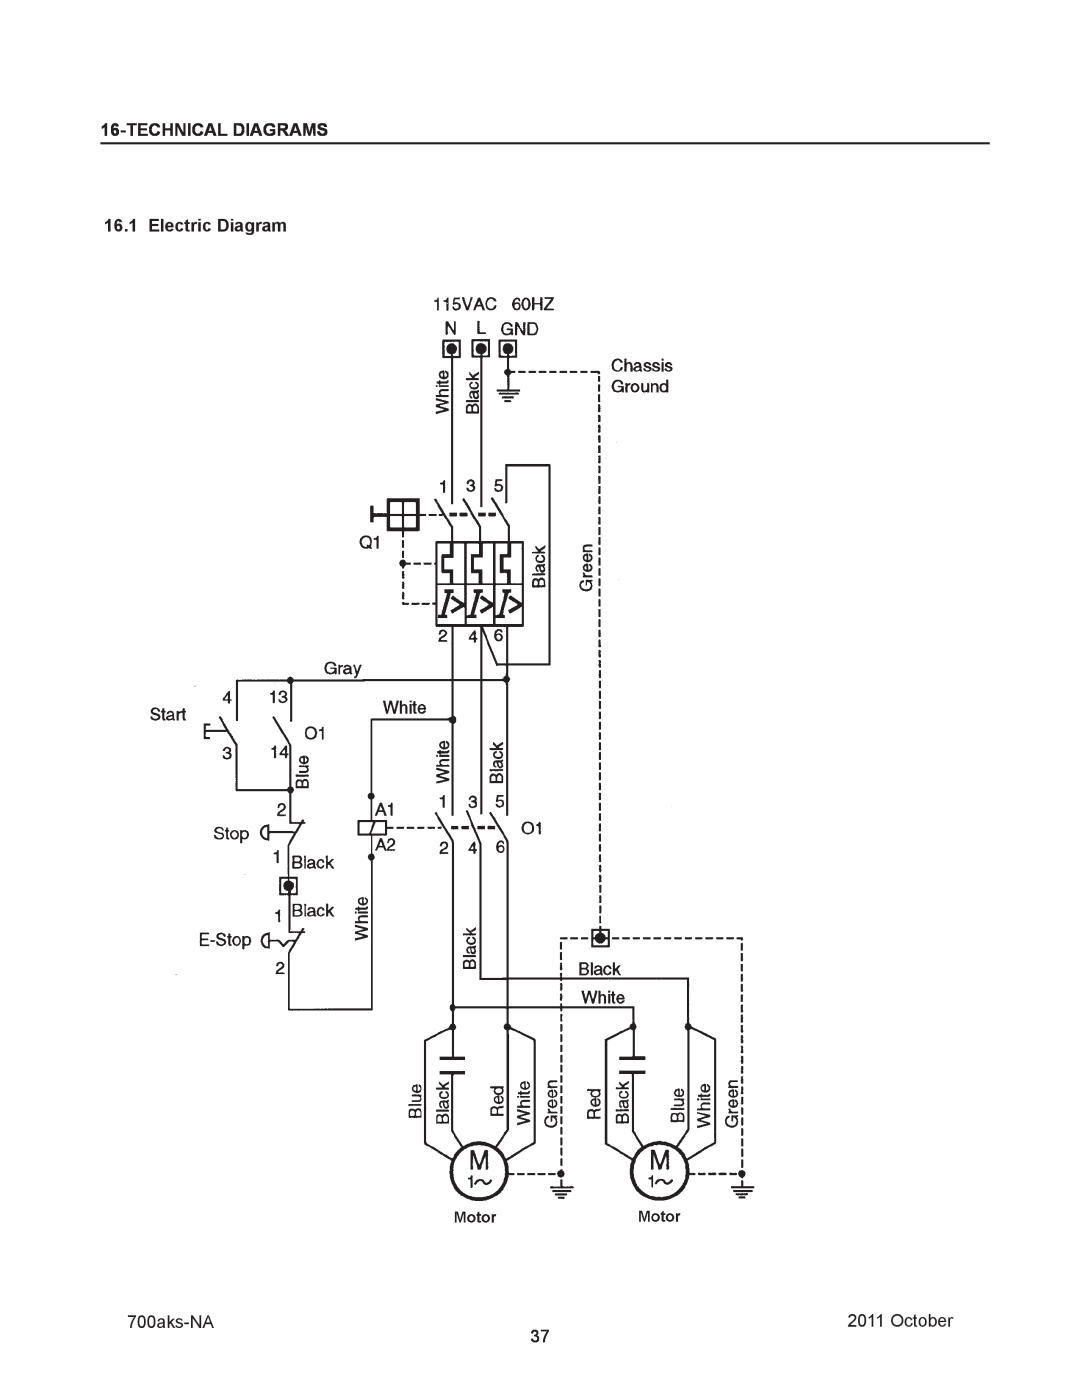 3M 40800 operating instructions TECHNICALDIAGRAMS 16.1 Electric Diagram, 700aks-NA, October 